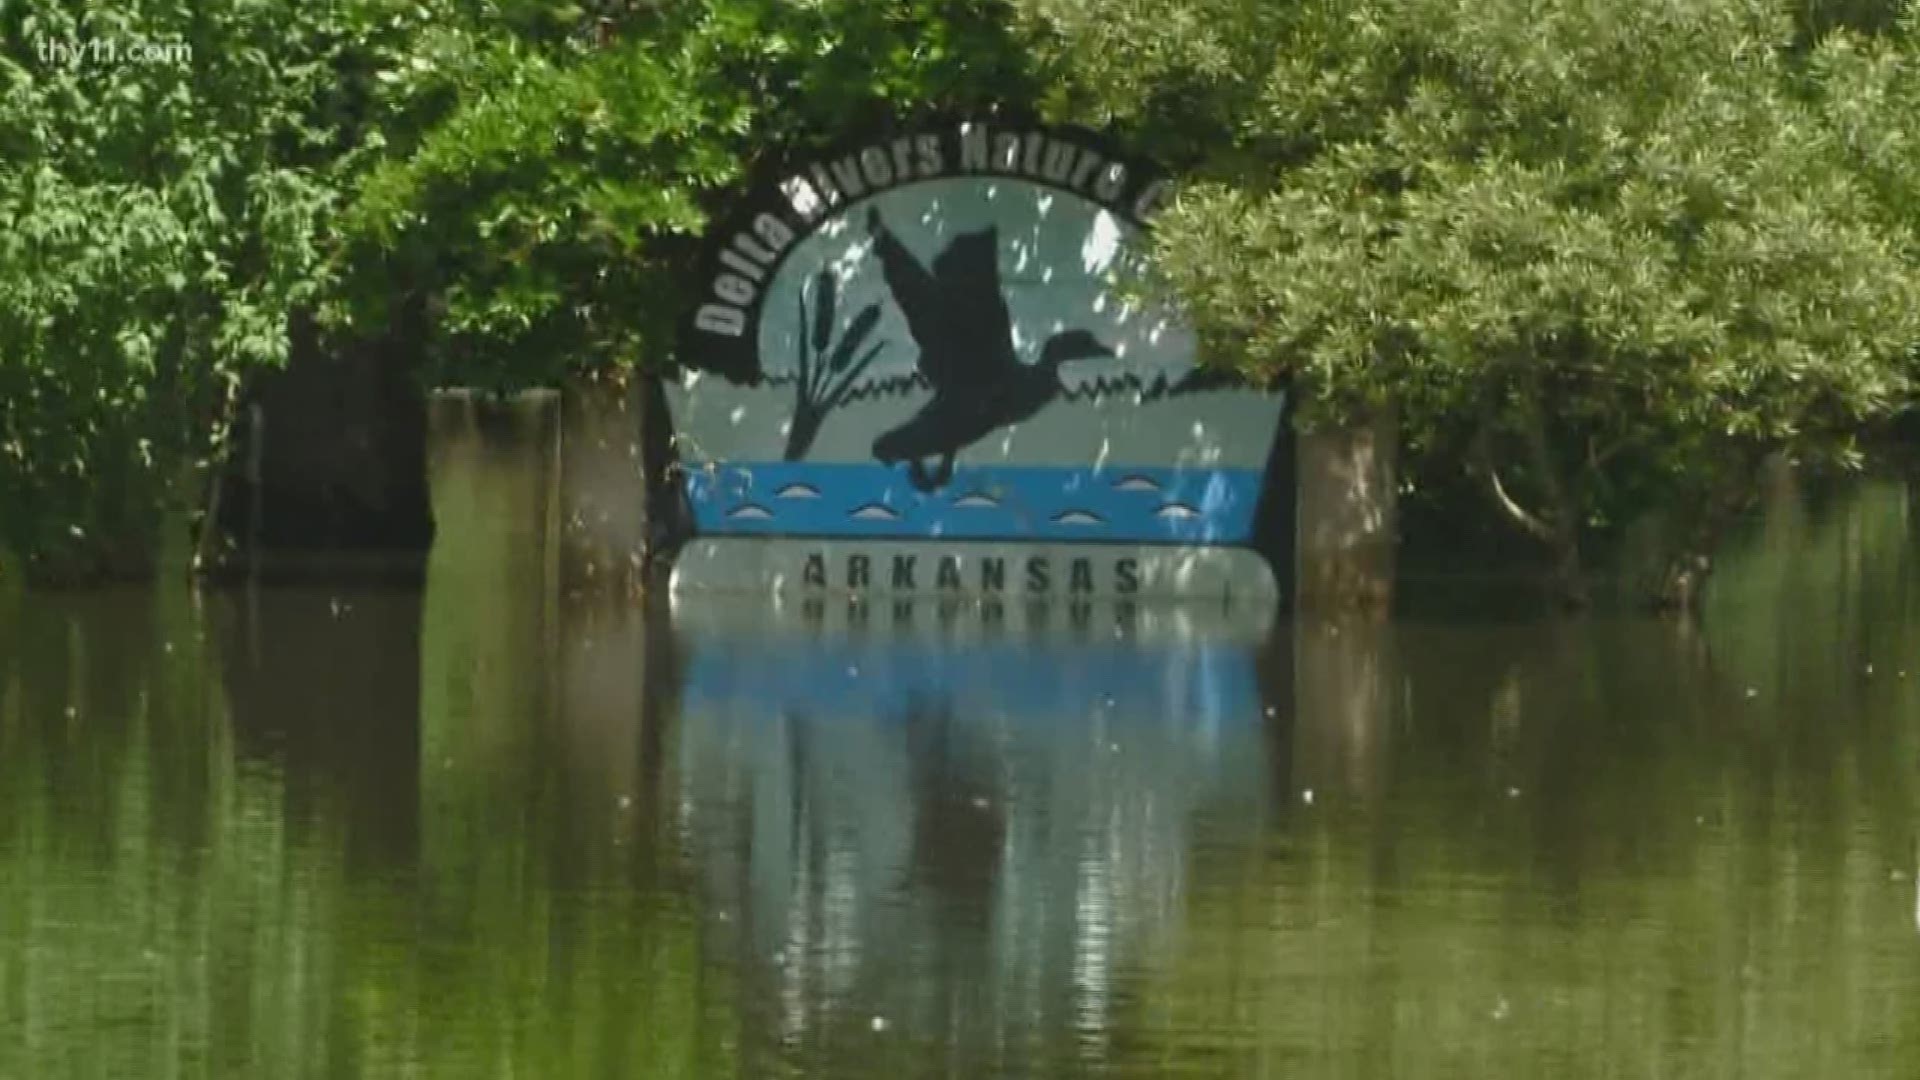 Floodwaters from the Arkansas River have severely damaged the Regional Park and Mike Huckabee Nature Center in Pine Bluff.